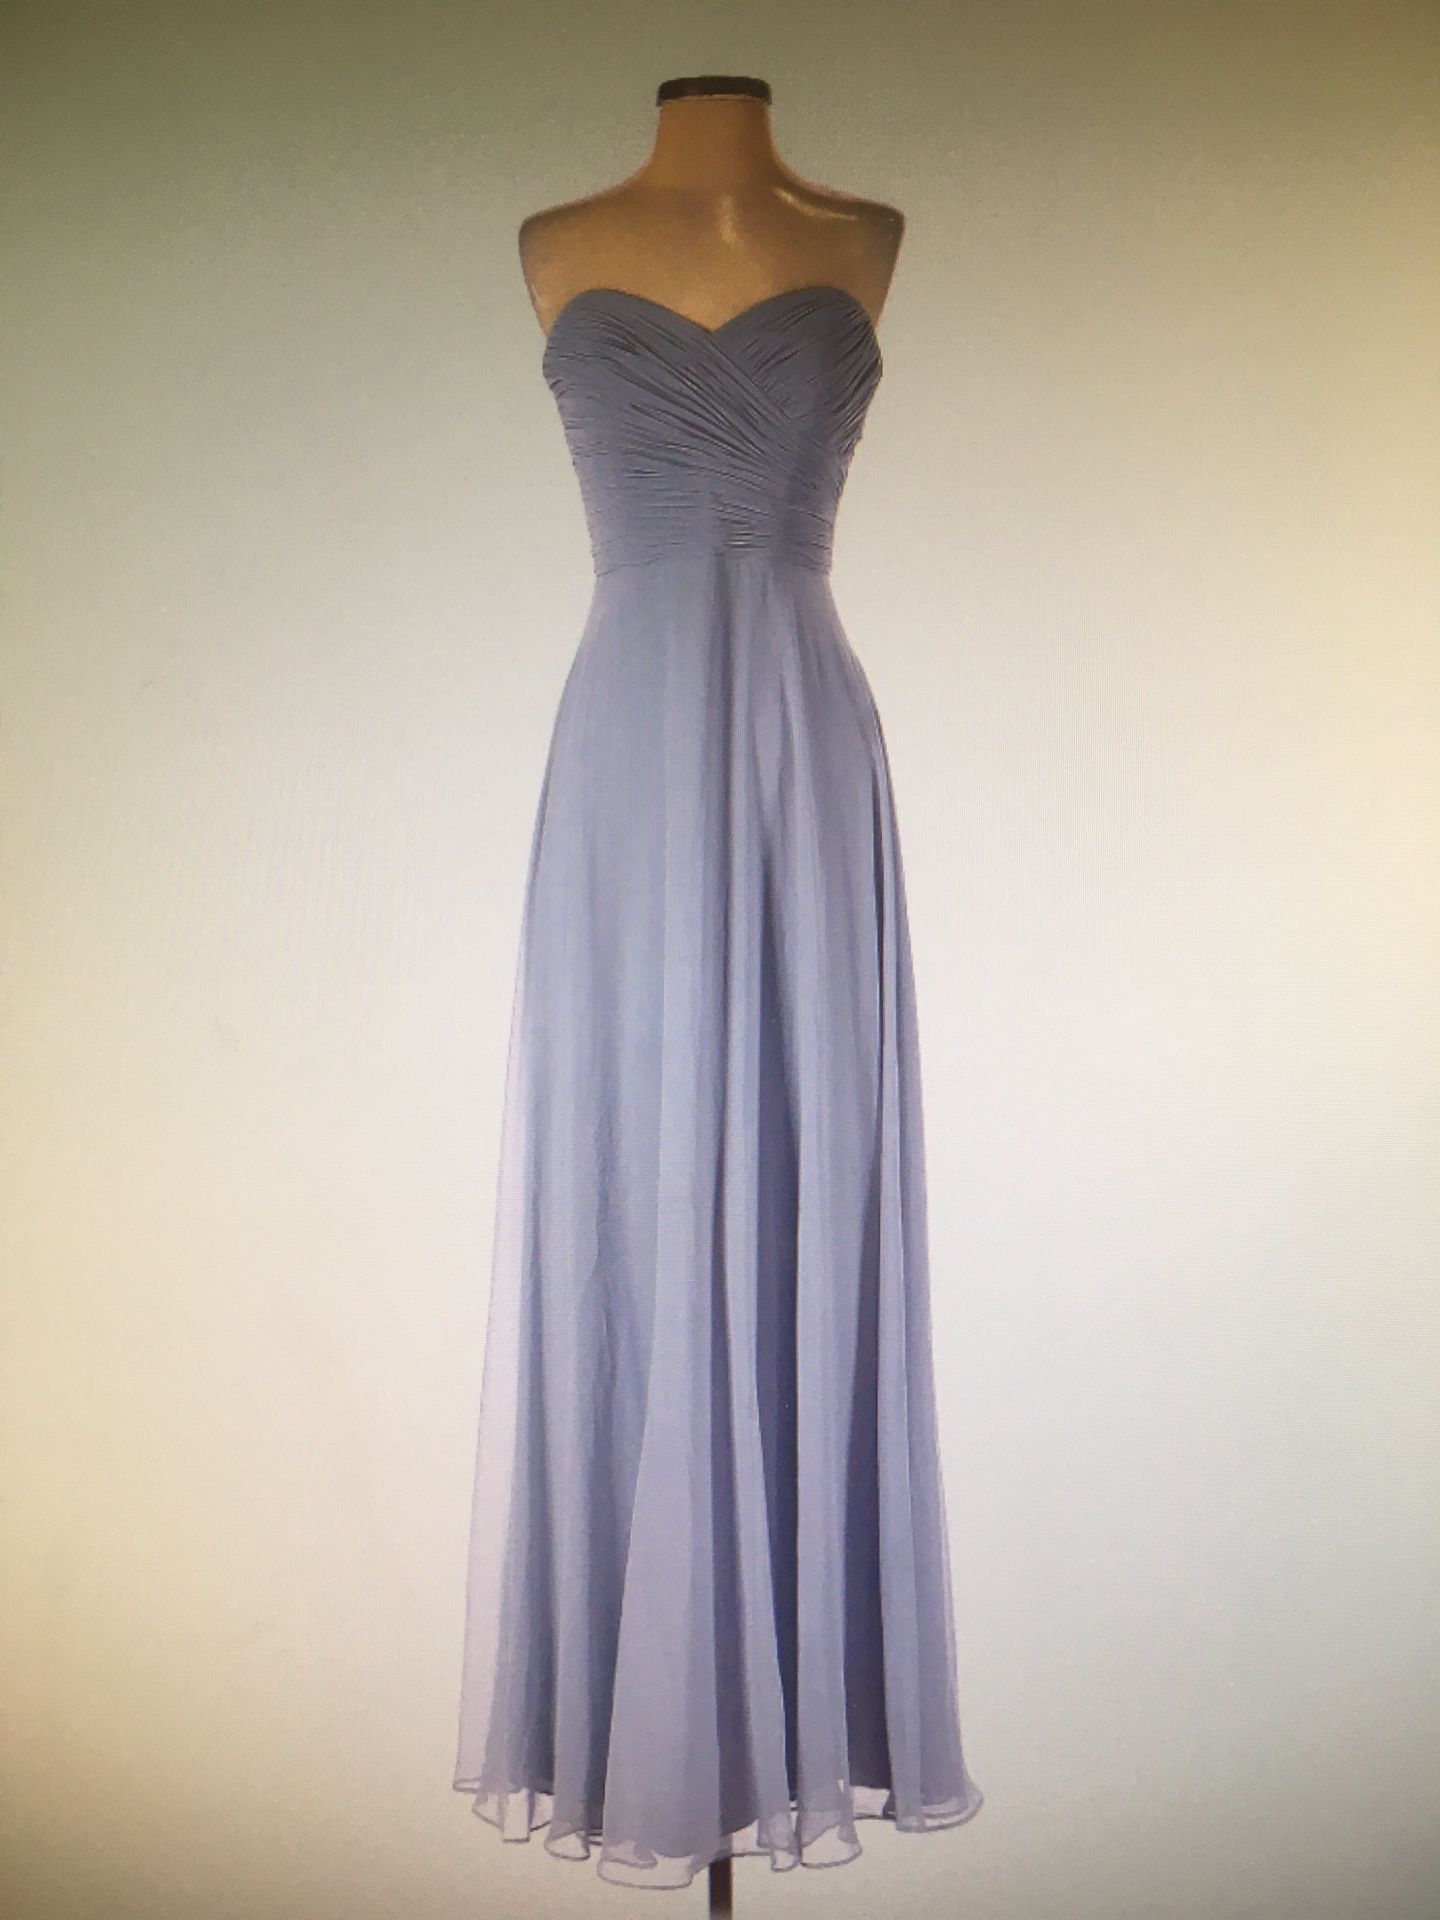 Formal Dress Strapless Size 4 Prom Party Wedding 